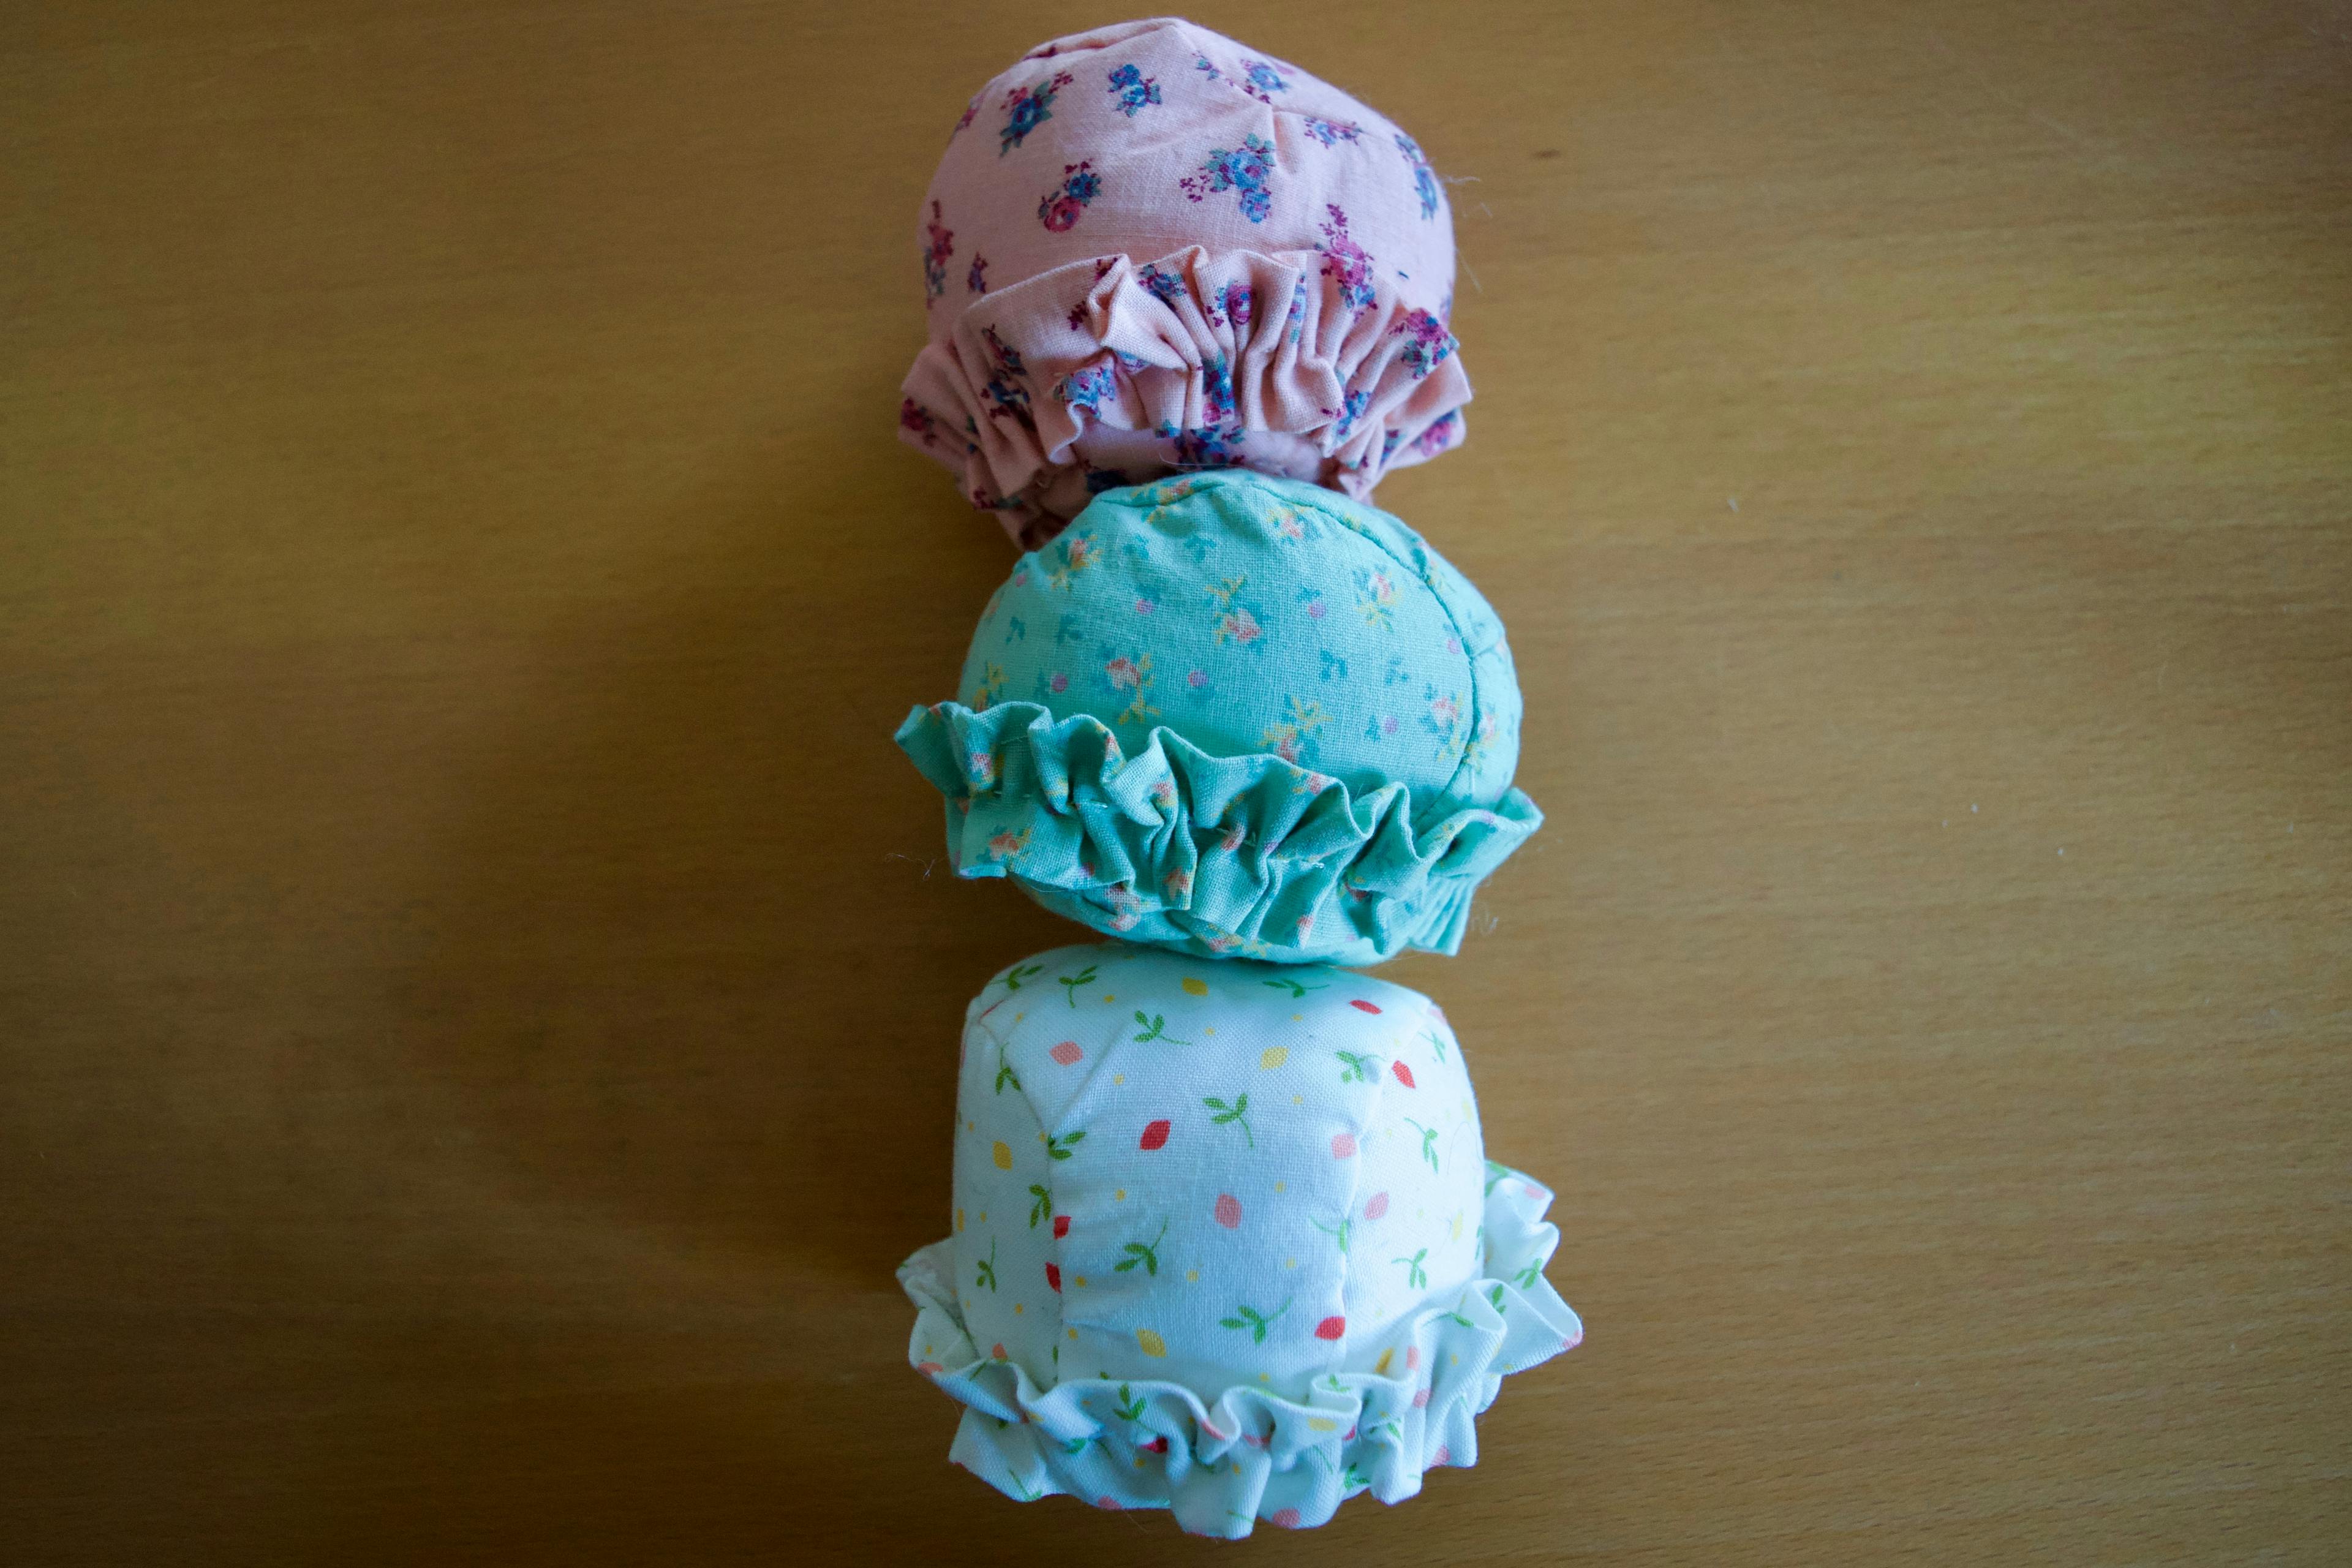 Scoops with ruffles attached